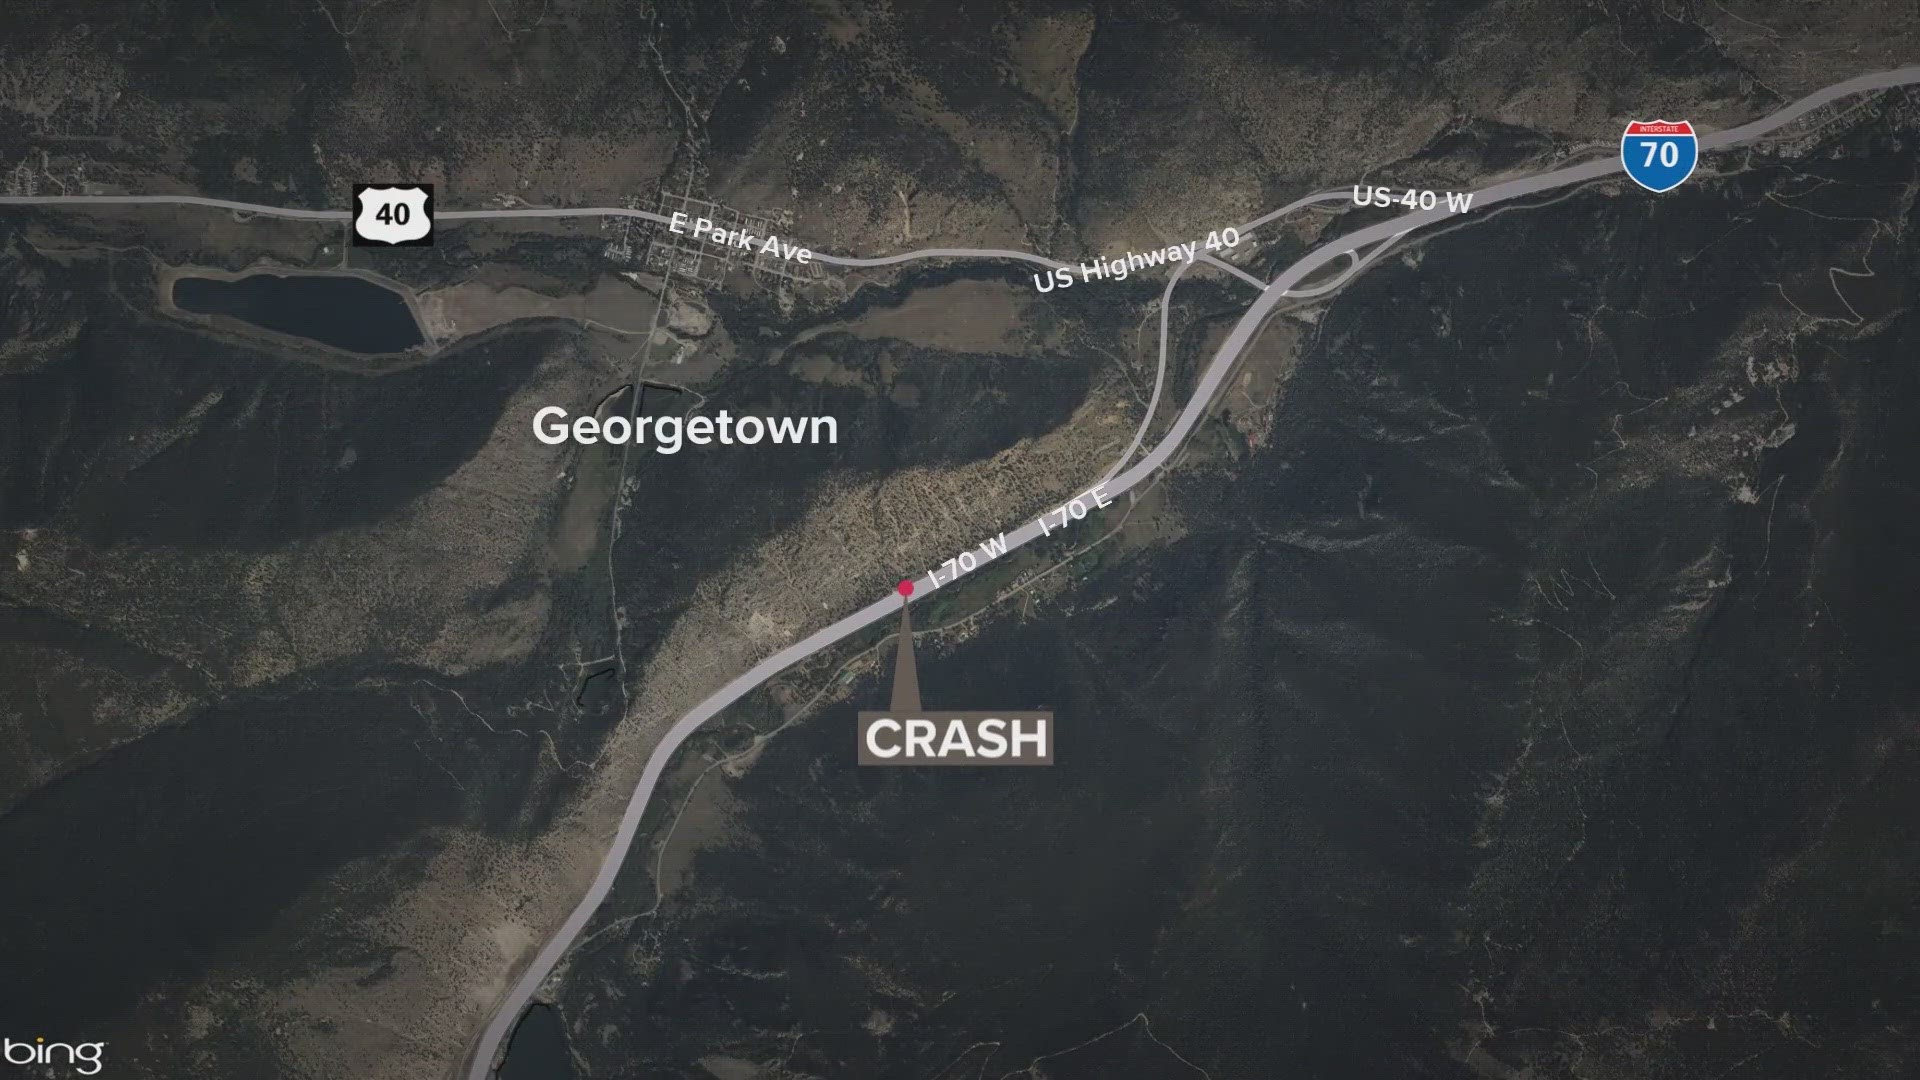 The crash happened around 9 p.m. Saturday, the Clear Creek County Sheriff's Office said.